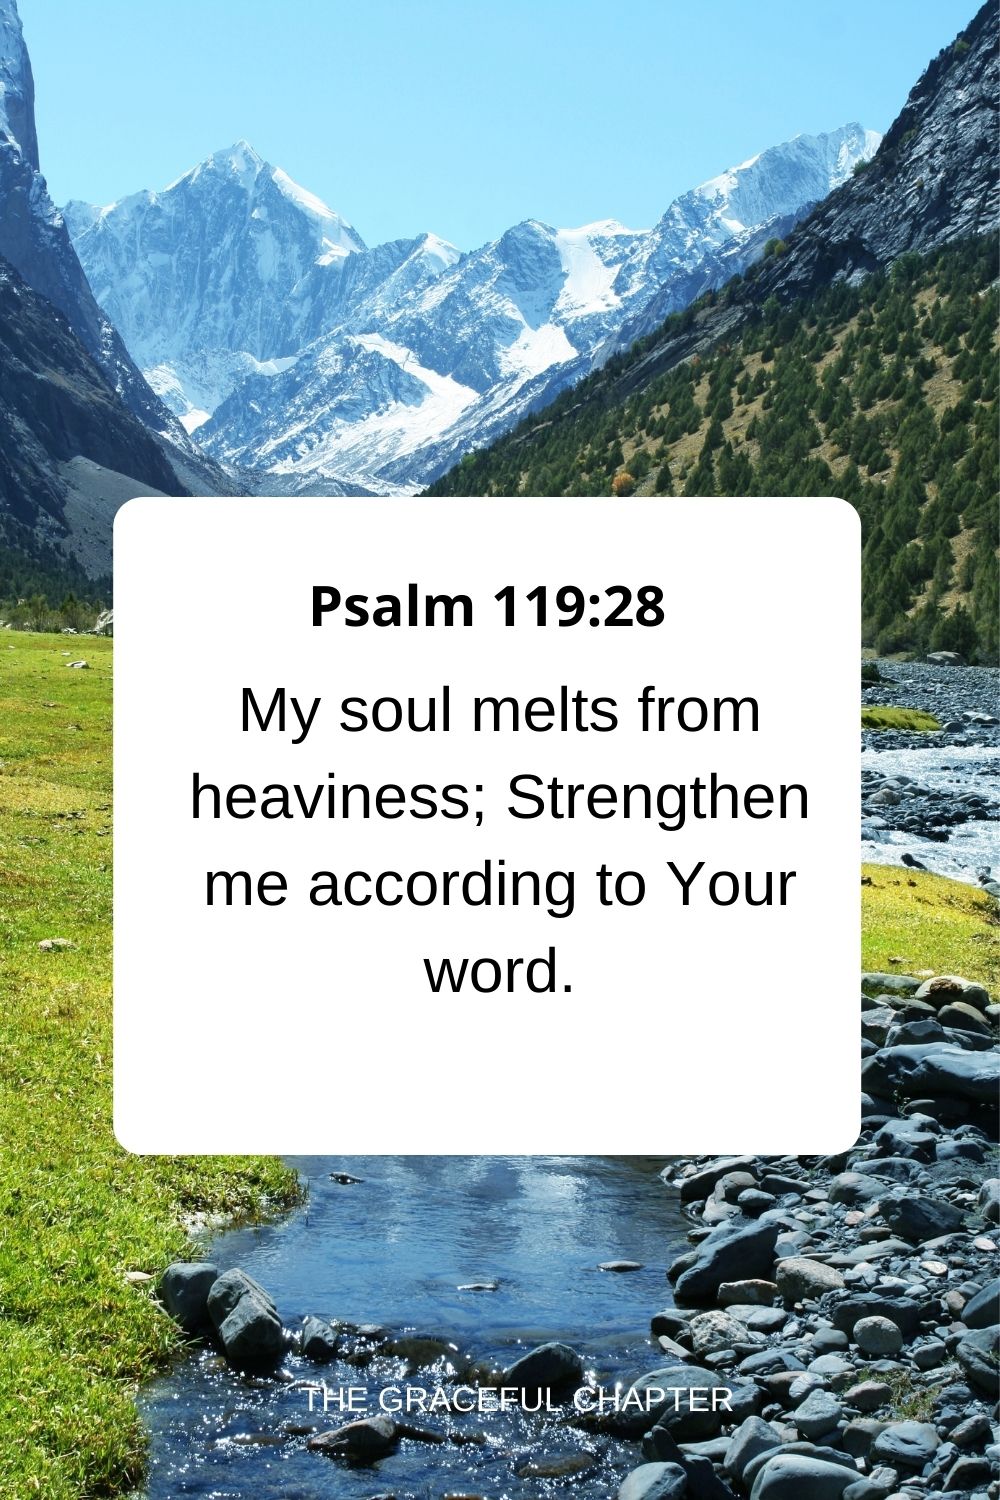 My soul melts from heaviness; Strengthen me according to Your word. Psalm 119:28